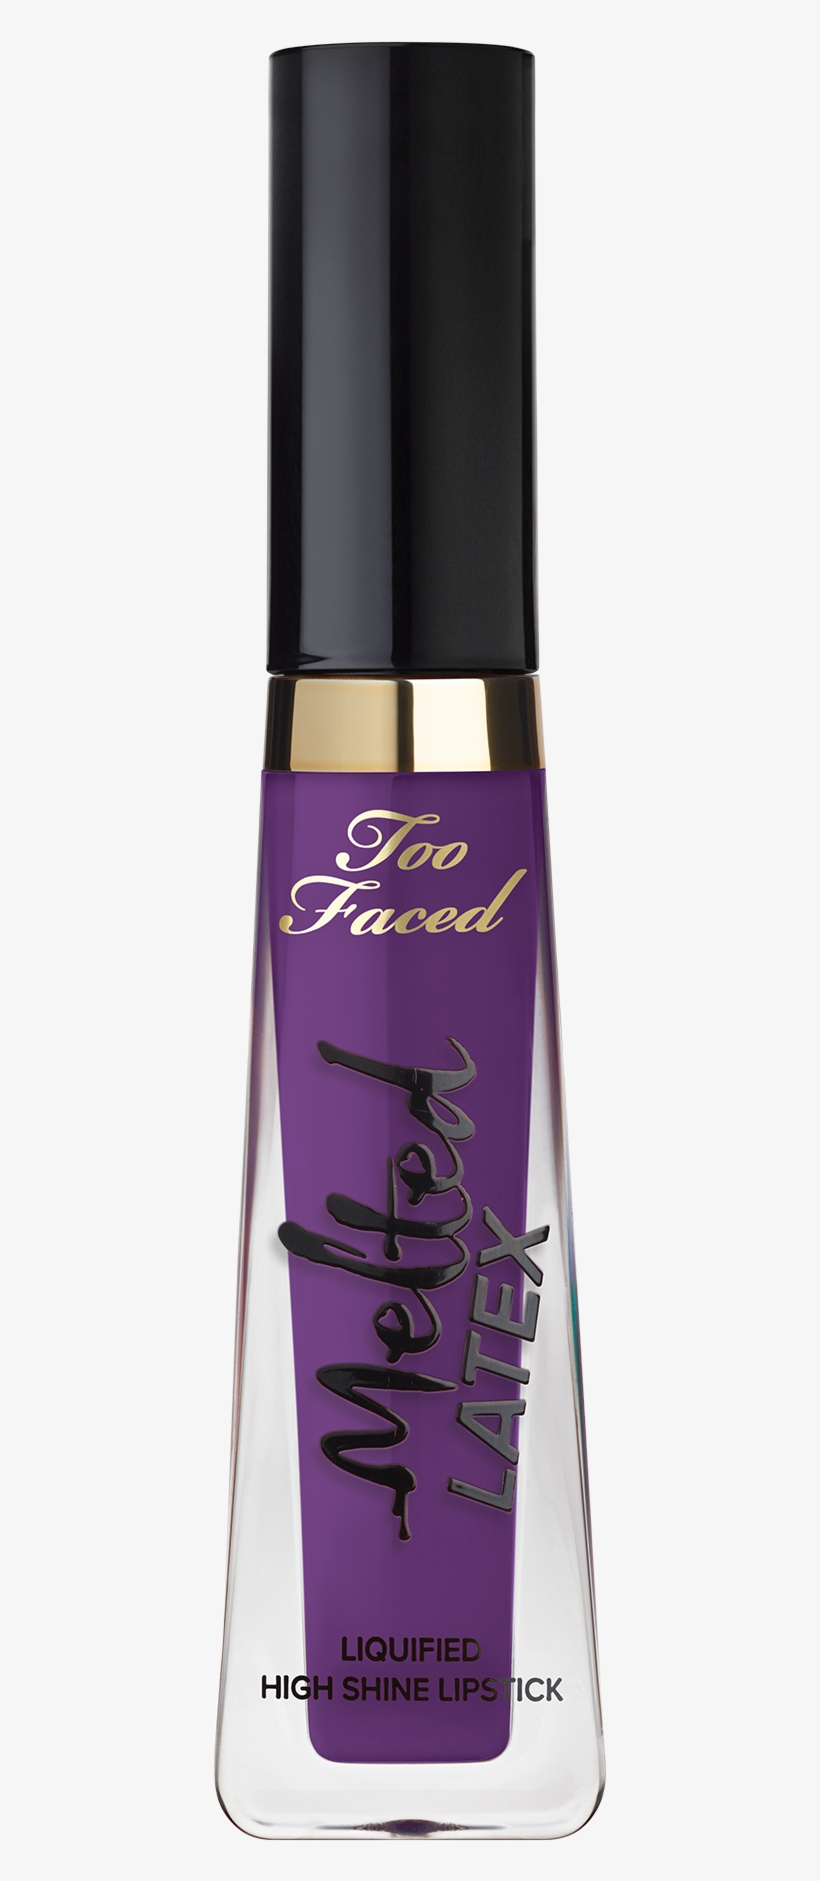 Melted Latex - Bye Felicia - Too Faced Melted Latex - Liquified High Shine Lipstick, transparent png #3770887